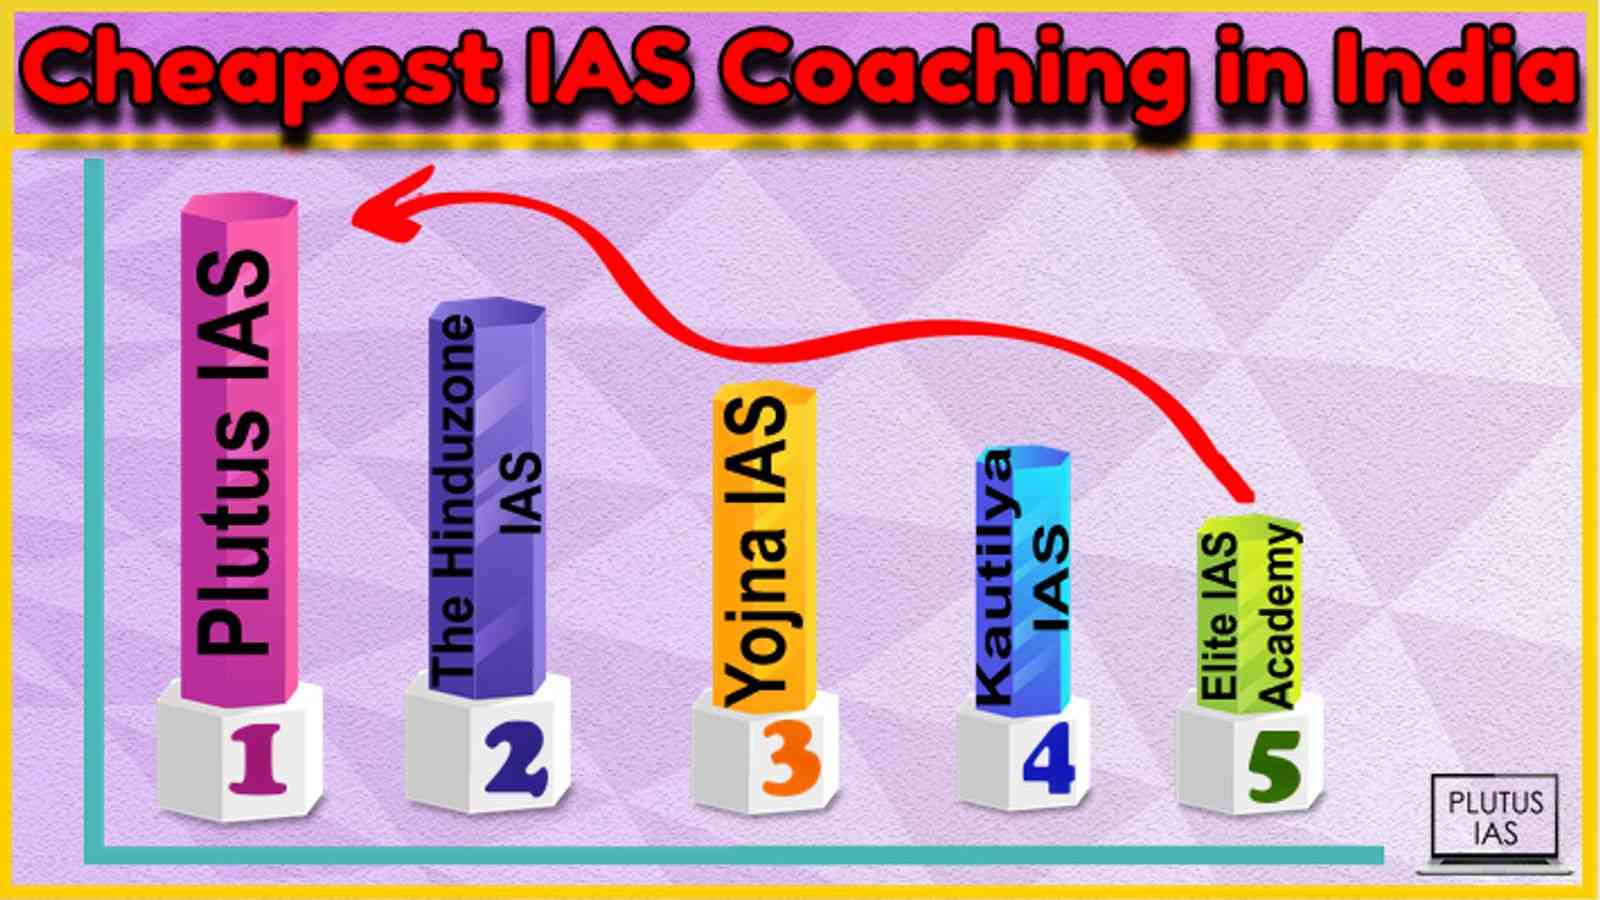 Cheapest IAS Coaching in India